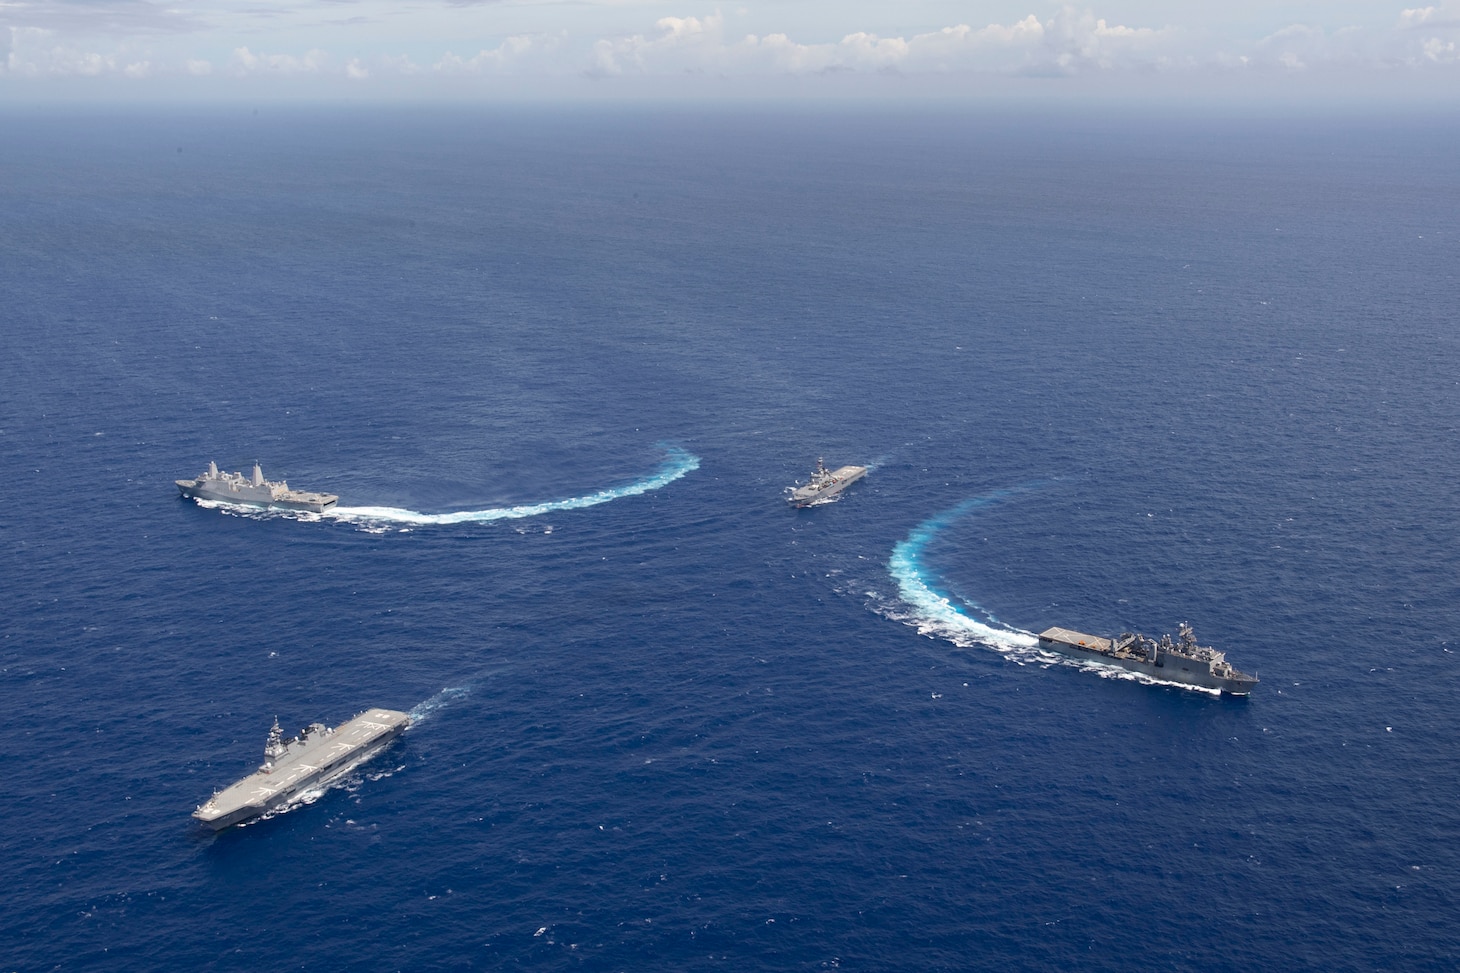 190608-N-BK435-2001 PHILIPPINE SEA (June 8, 2019) – The San Antonio-Class amphibious transport dock USS Green Bay (LPD 20) and Whidbey Island-Class dock landing ship USS Ashland (LSD 48) break out of formation in a photo exercise (PHOTOEX) with Japanese helicopter destroyer JS Ise (DDH-182) and Ousumi-Class tank landing ship JS Kunisaki (LST 4003) during a bilateral transit.  The Wasp Amphibious Ready Group is transiting with JS Ise and JS Kunisaki in the U.S. 7th Fleet area of operations.